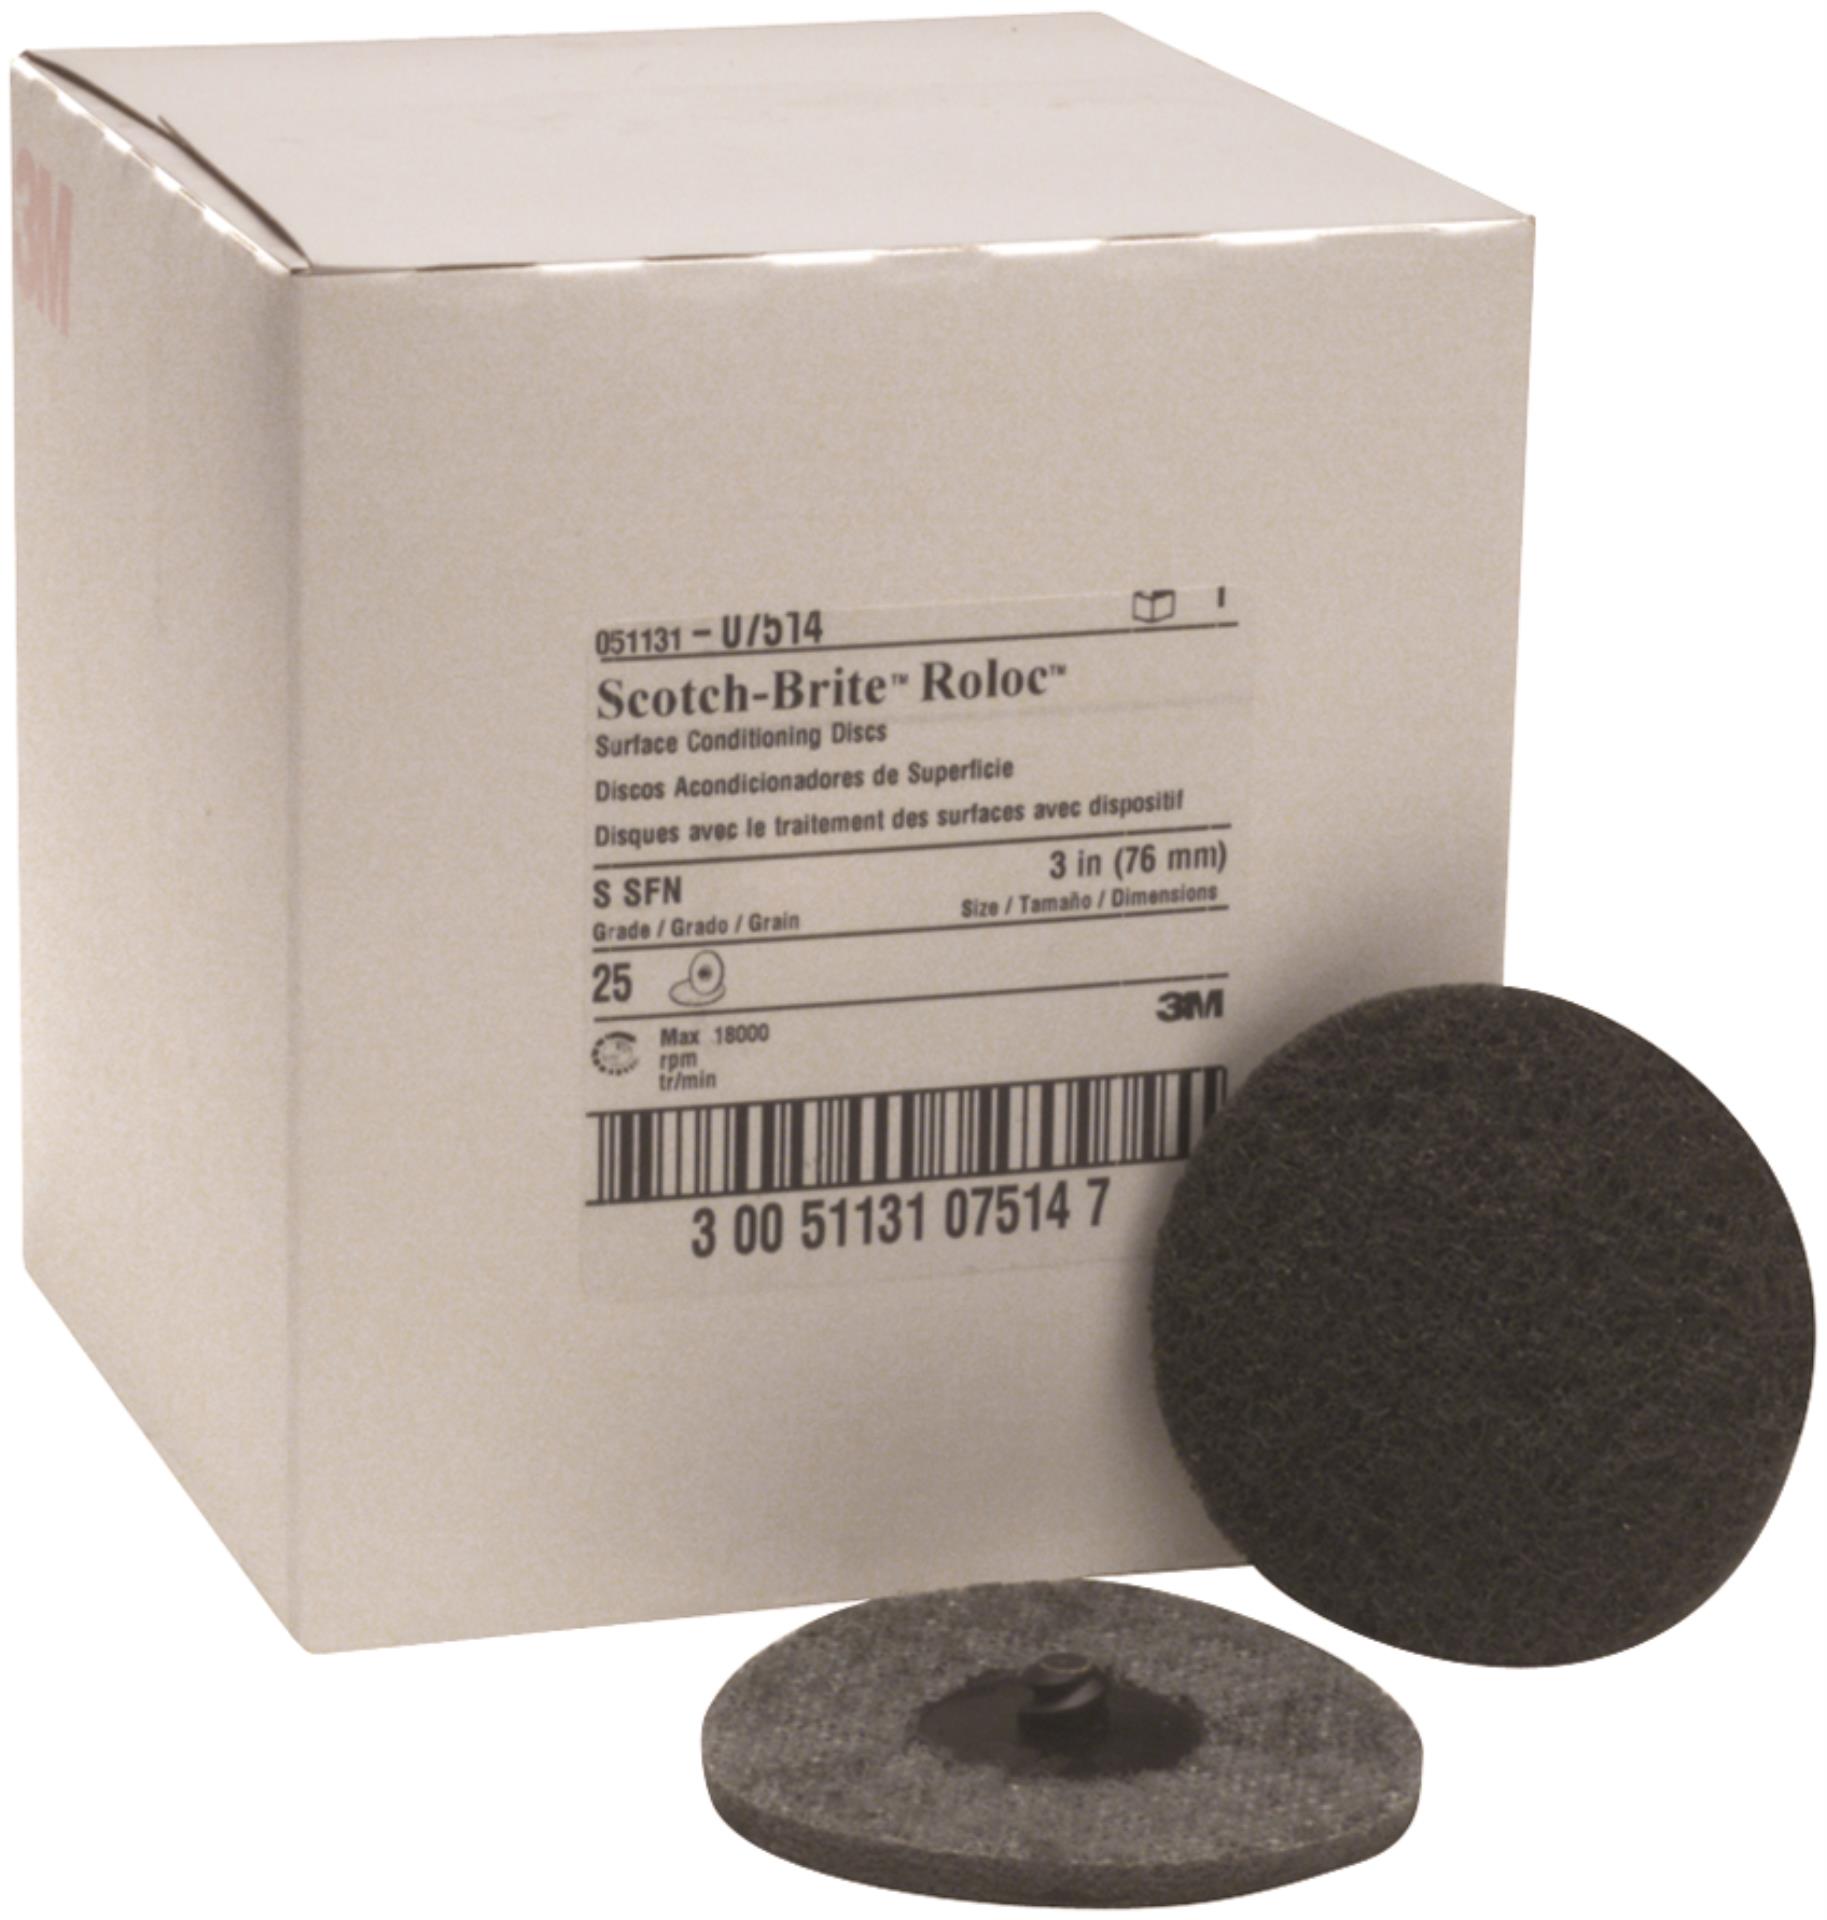 https://www.e-aircraftsupply.com/ItemImages/74/7000120974_Scotch-Brite_Roloc_Surface_Conditioning_Disc_TR_07514.jpg